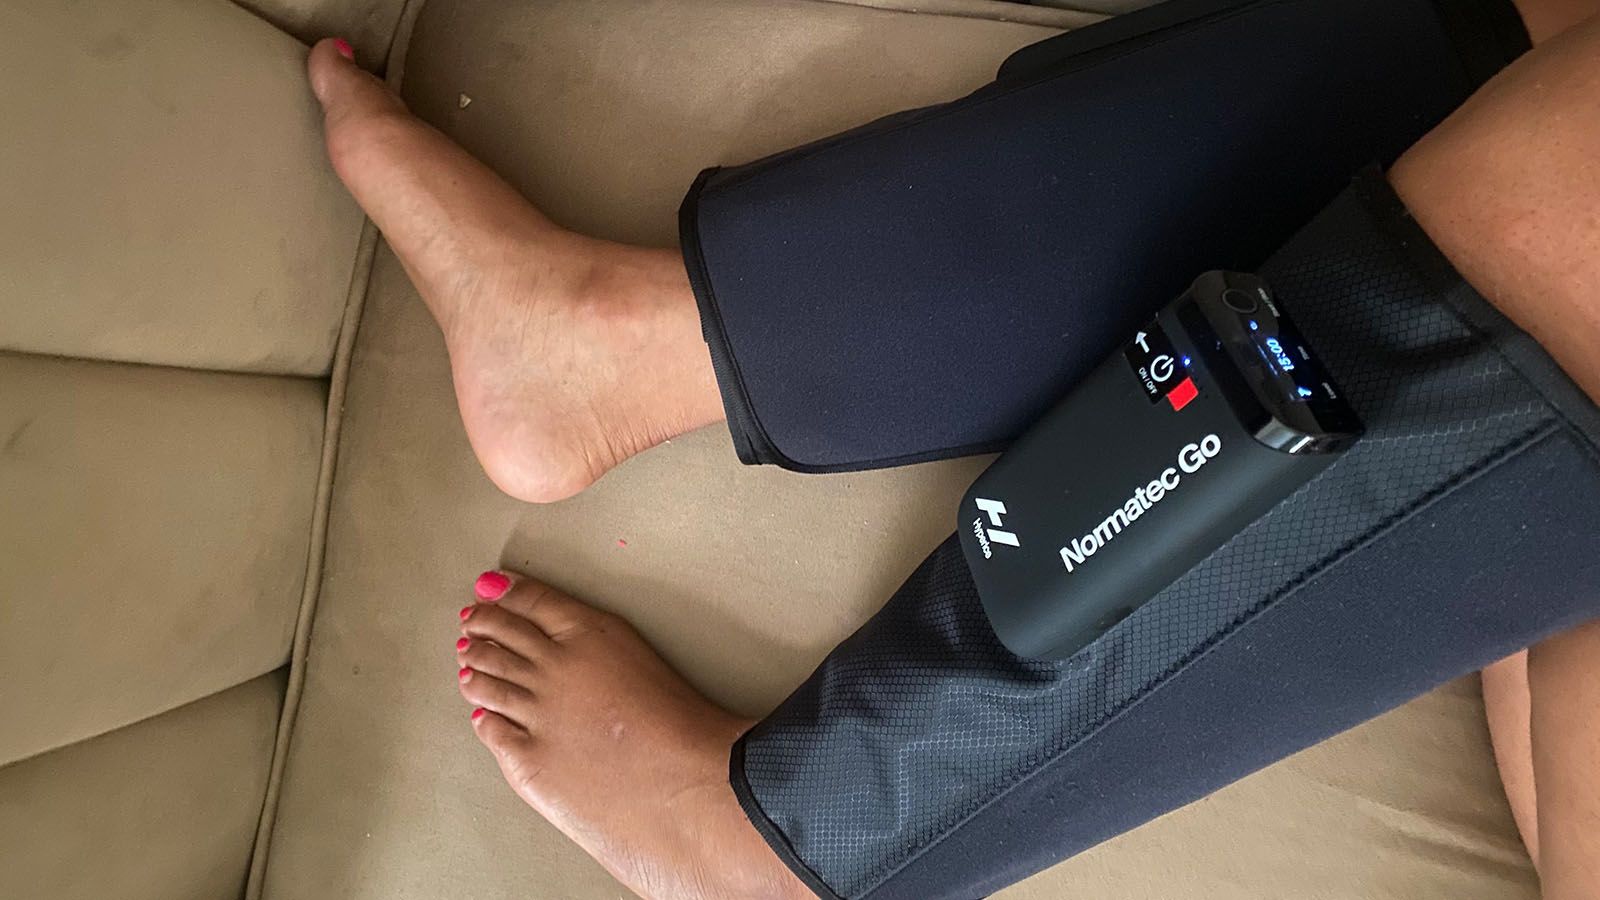 NORMATEC compression system can help with your injury recovery